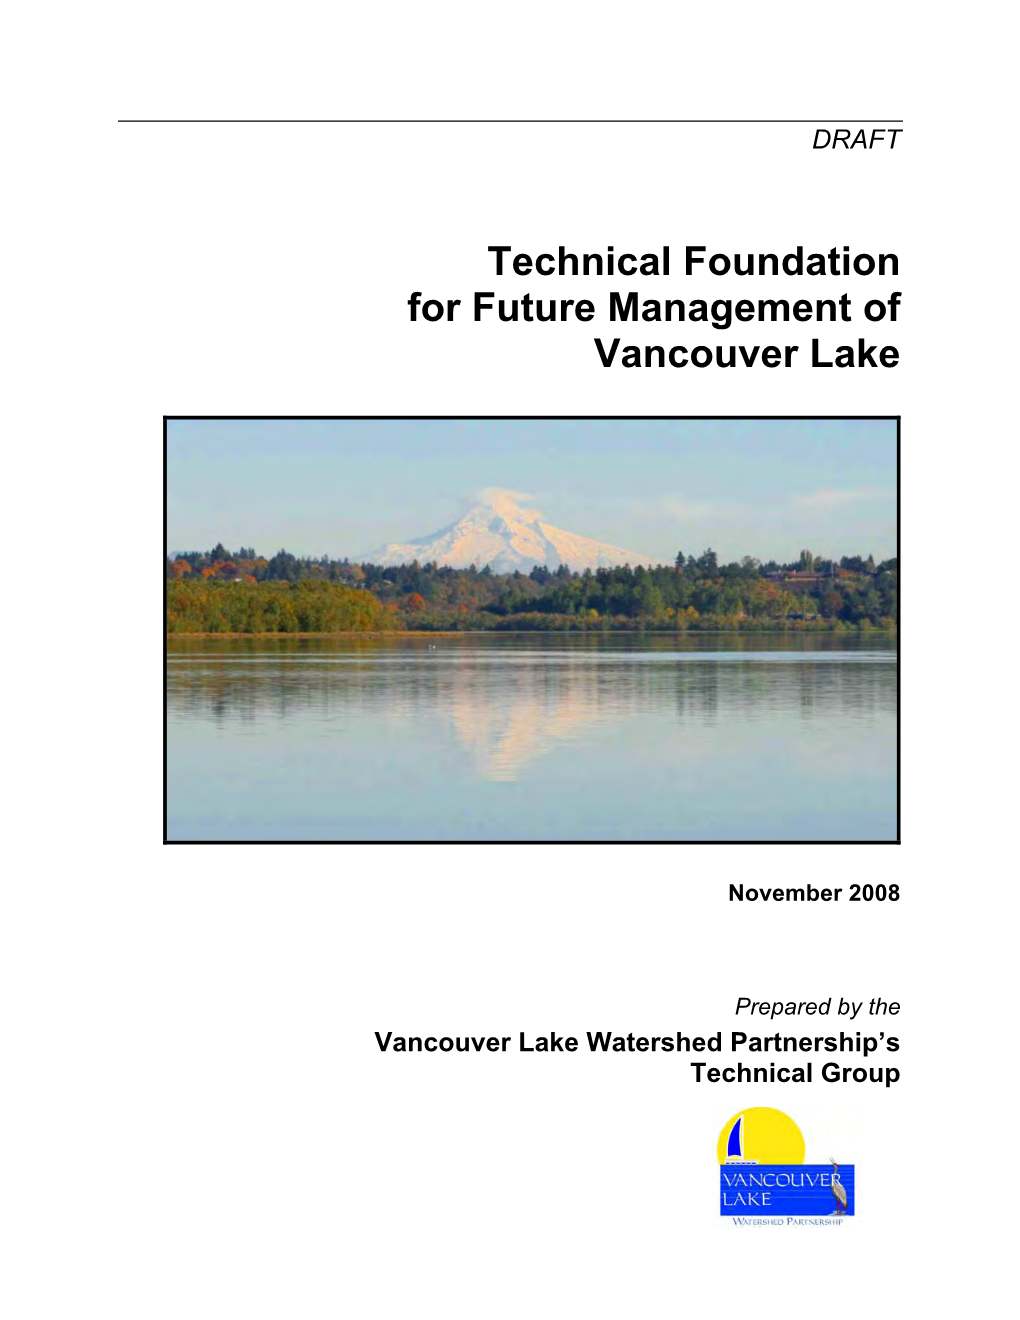 Technical Foundation for Future Management of Vancouver Lake